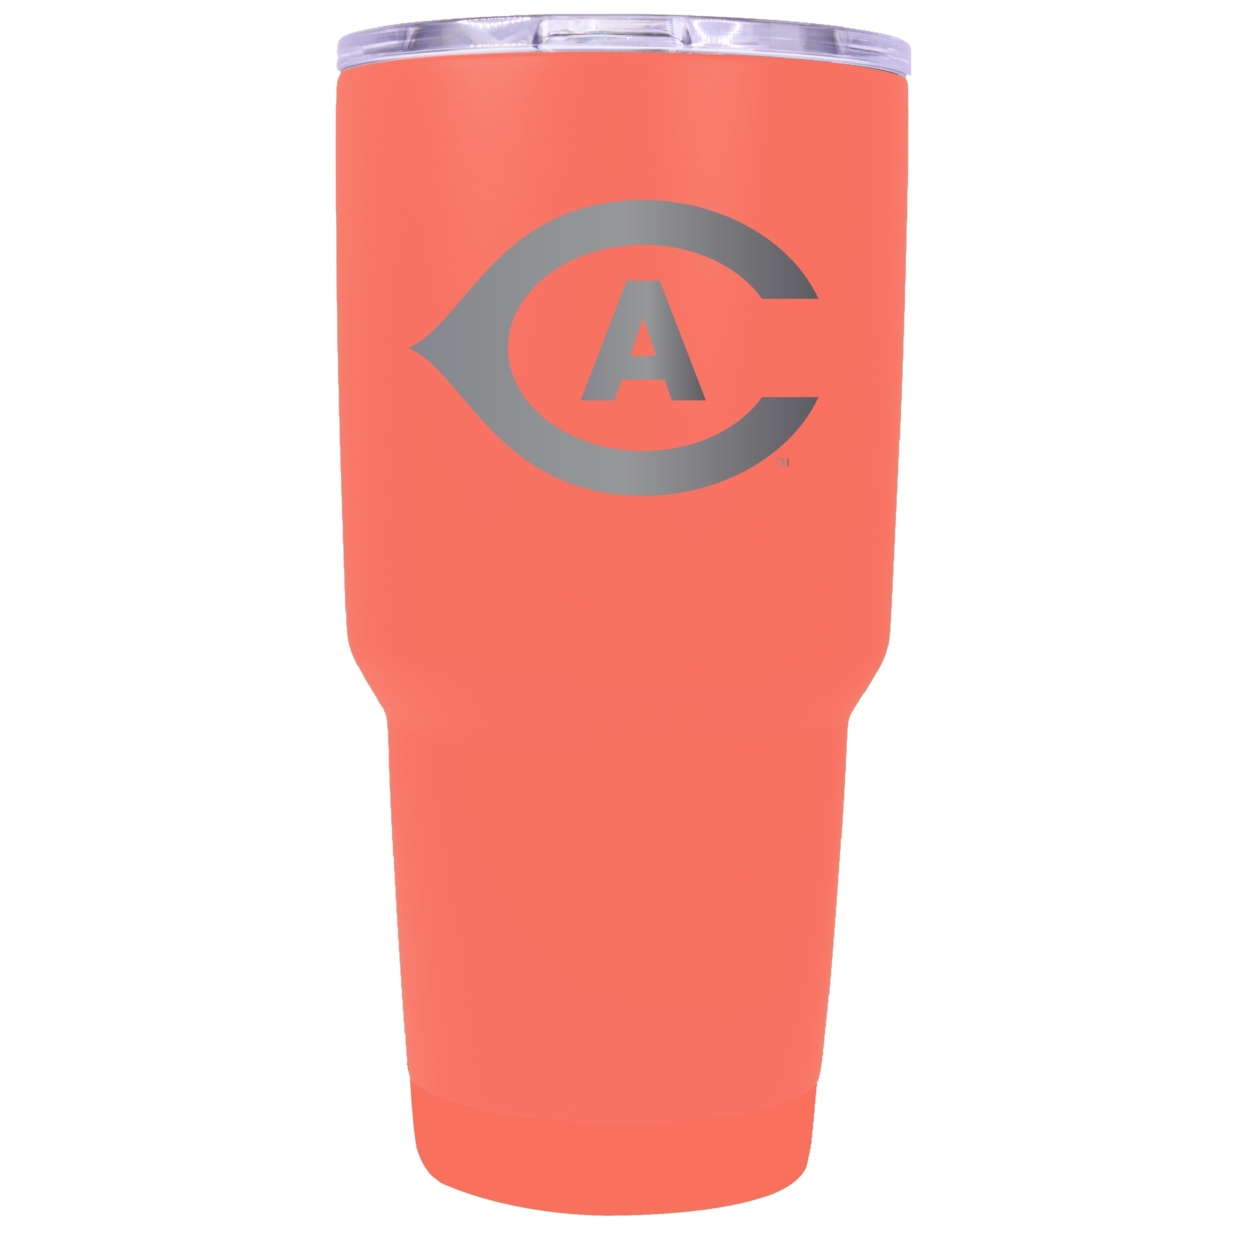 UC Davis Aggies 24 Oz Laser Engraved Stainless Steel Insulated Tumbler - Choose Your Color. - Coral